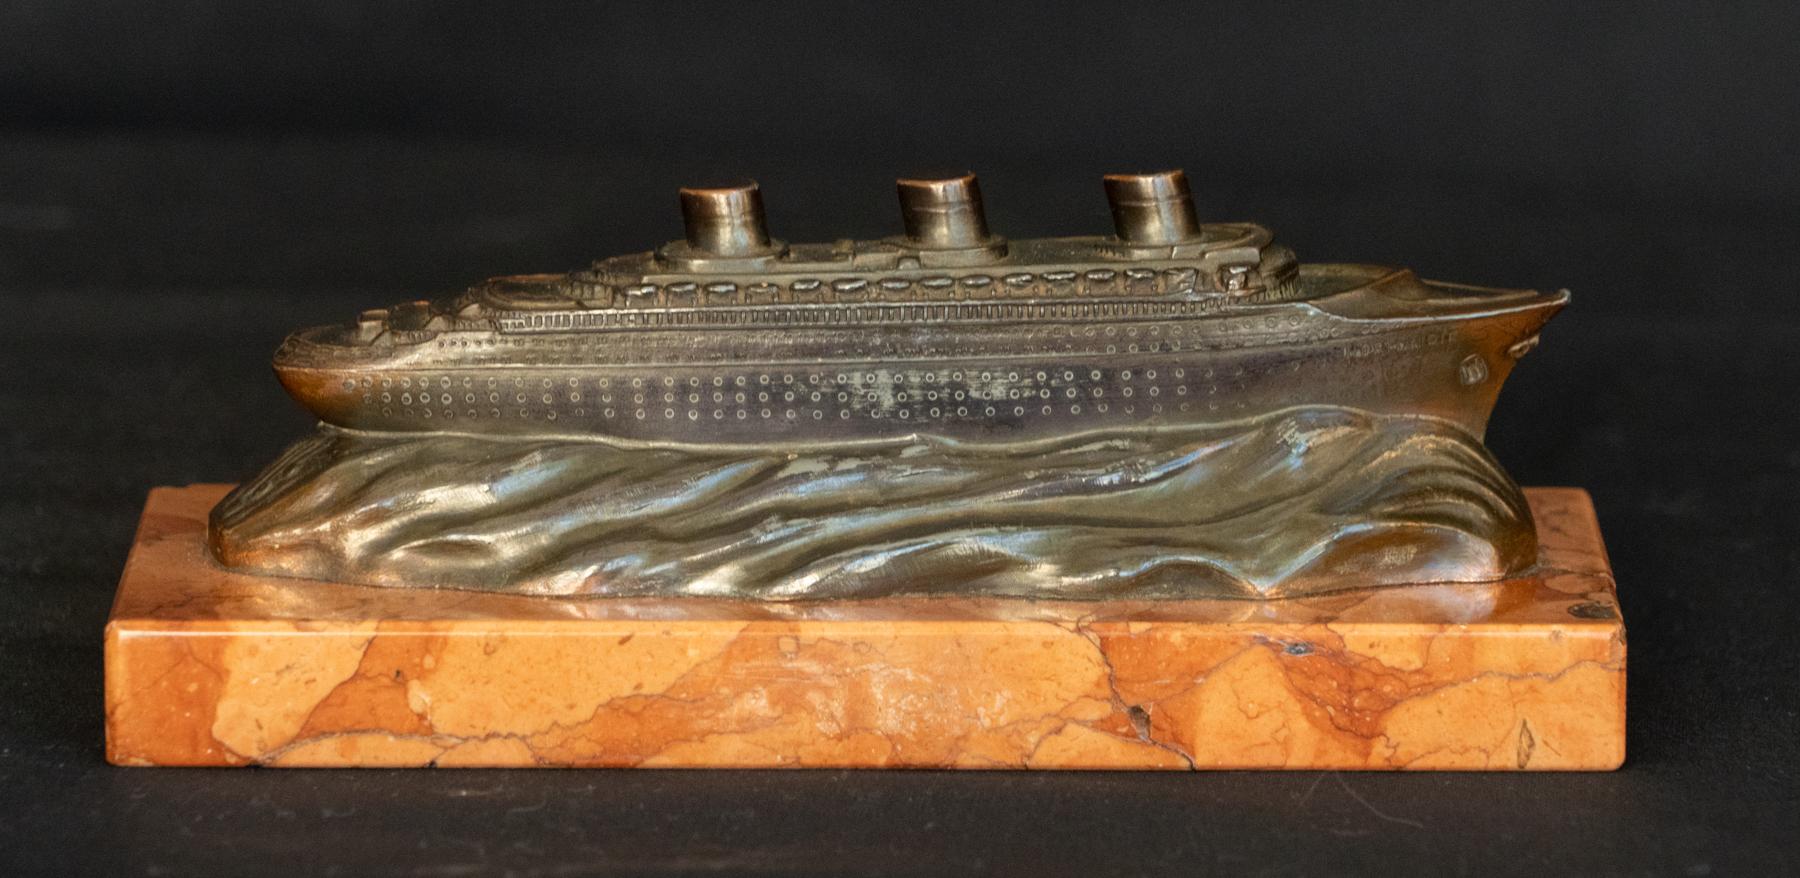 Mounted Bronze -Type Model of The SS Normandie at Sea. The commemorative of the SS Normandie (1932 - 1946) on the maiden voyage Circa 1935. 
Bronzed / spelter material with good details. Bold patina with tool marks and wear. Mounted on a rouge